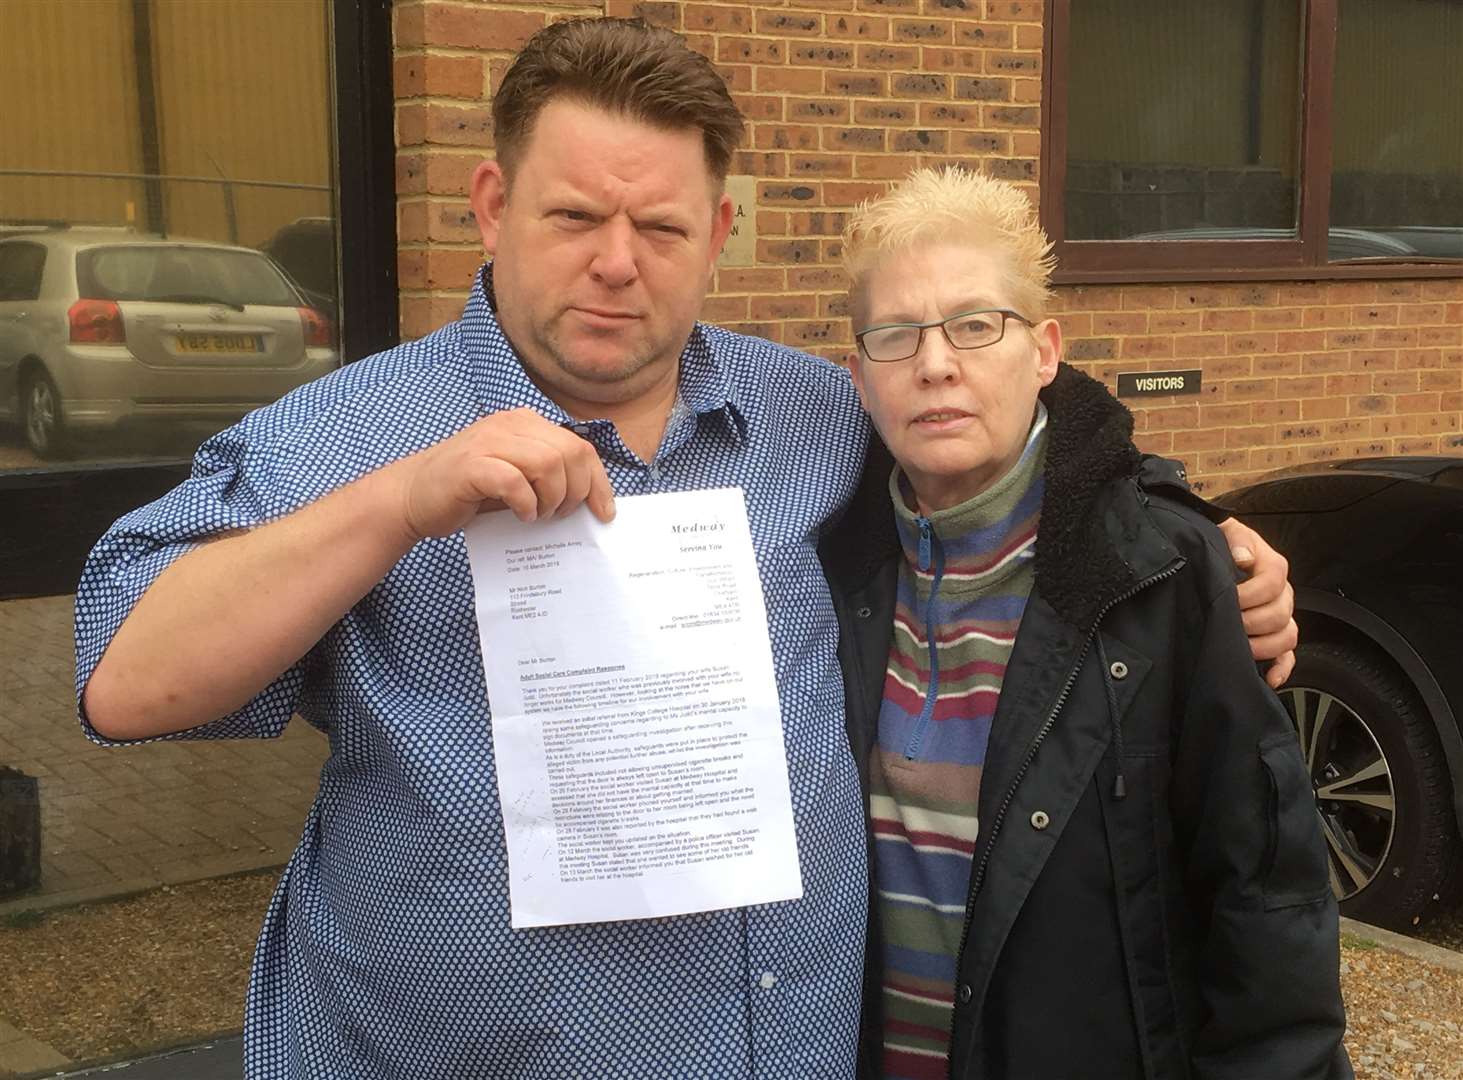 Nick Burton, pictured with wife Sue Judd, says he was treated as a suspect and threatened while social services investigated safeguarding concerns after she fell down the stairs